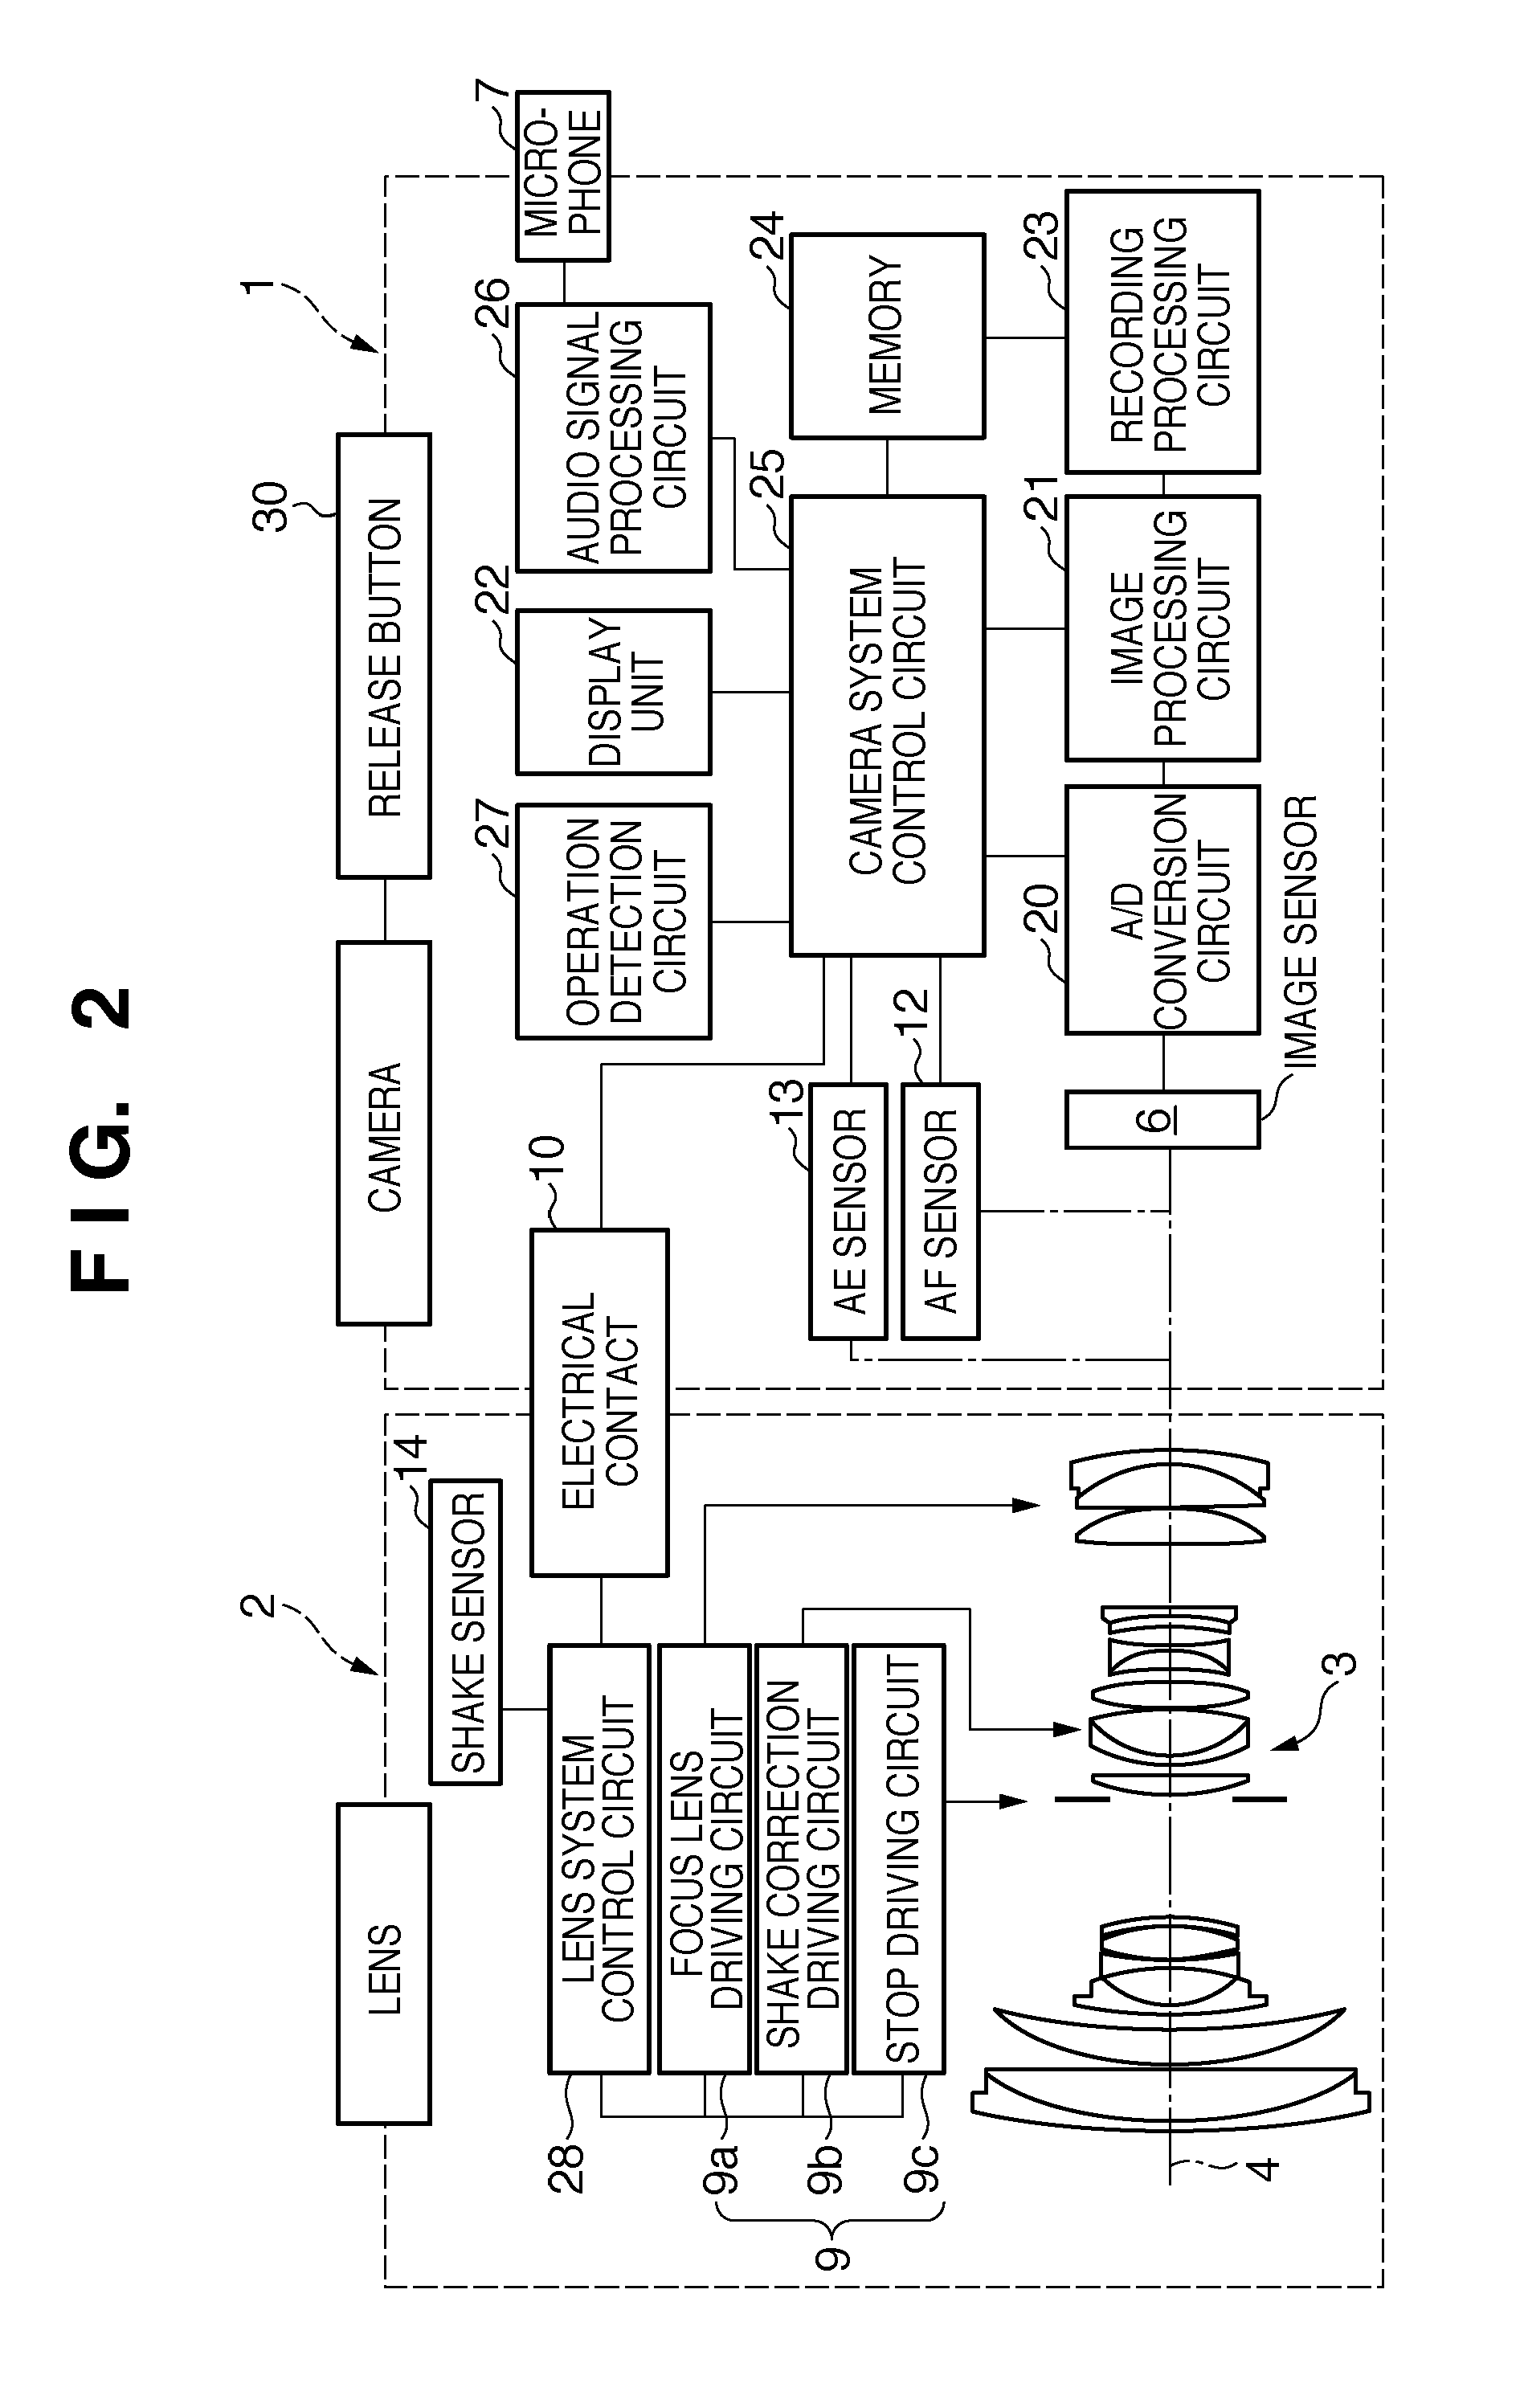 Audio signal processing apparatus and method of controlling the same